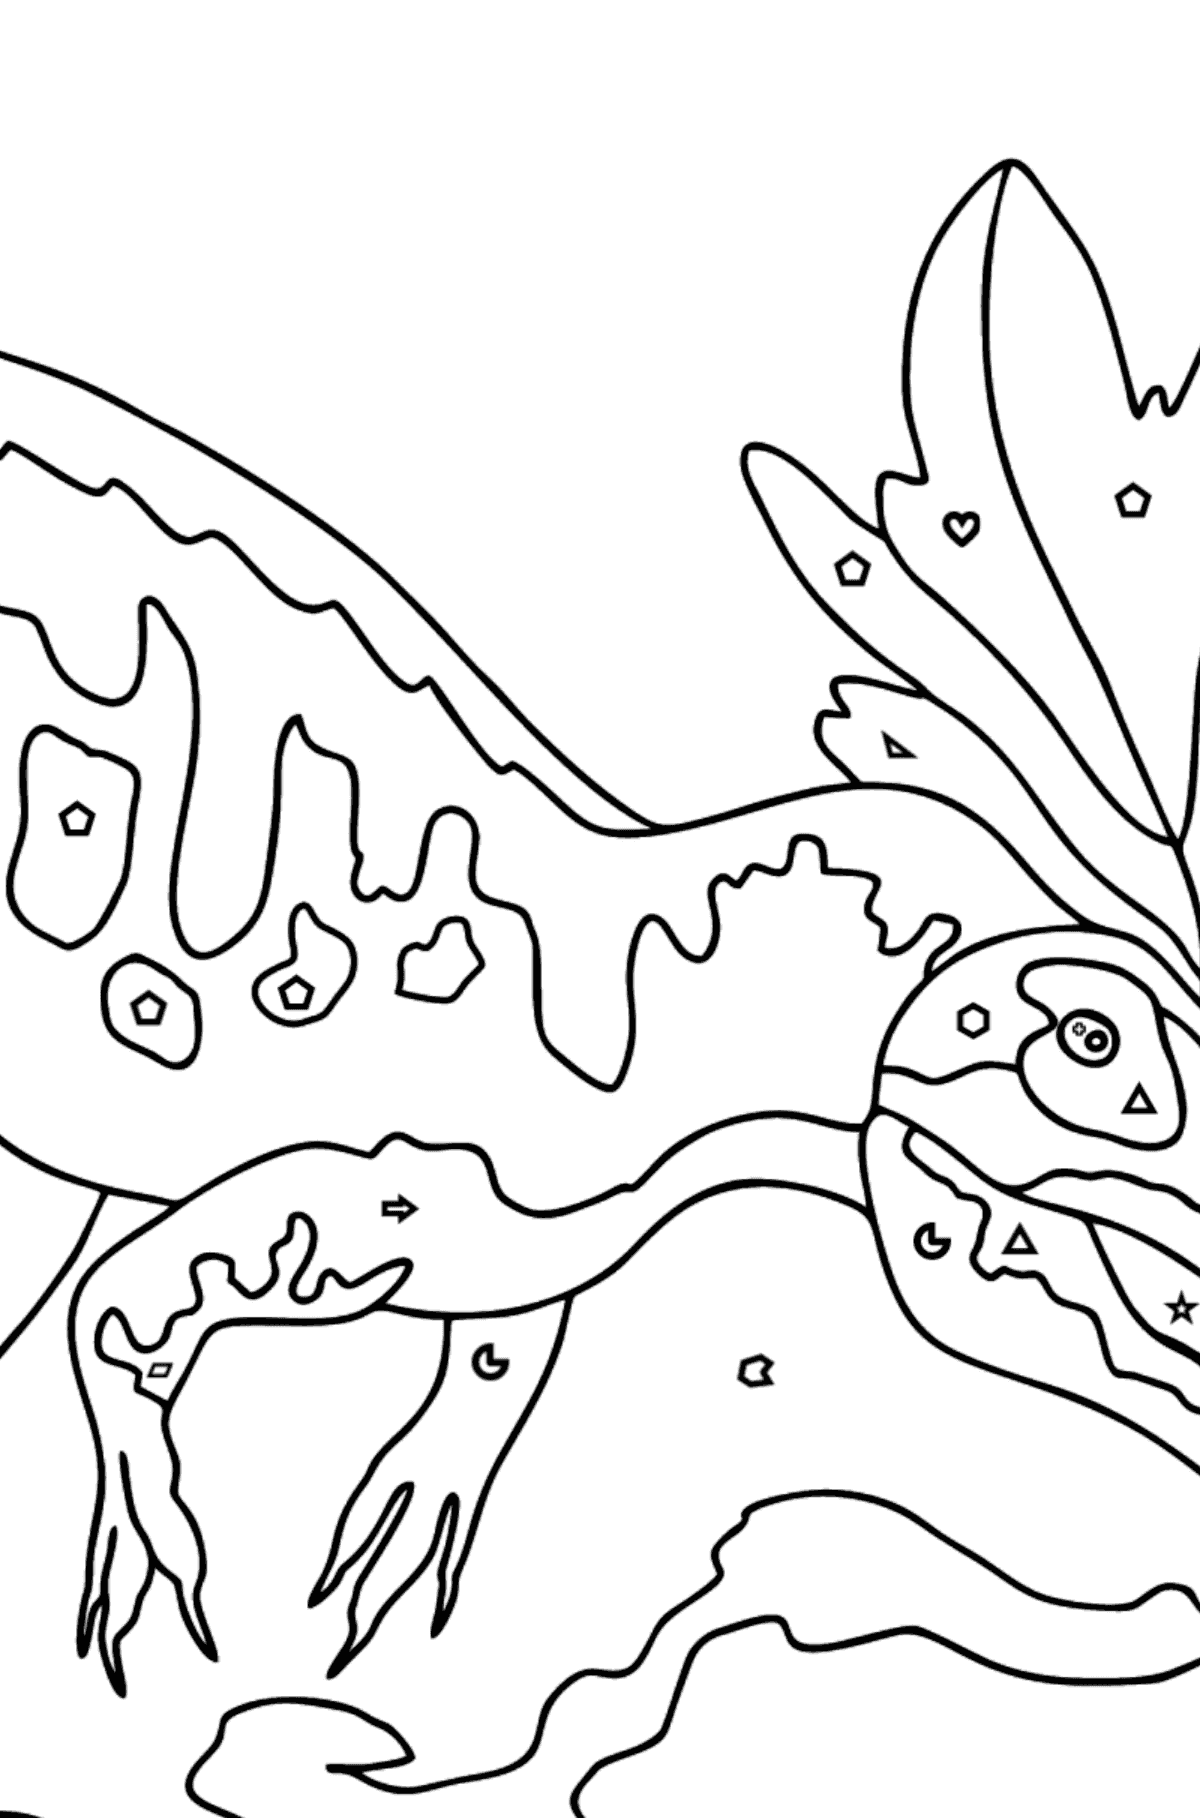 Coloring Page - Allosaurus - A Well-Researched Dinosaur - Coloring by Geometric Shapes for Kids